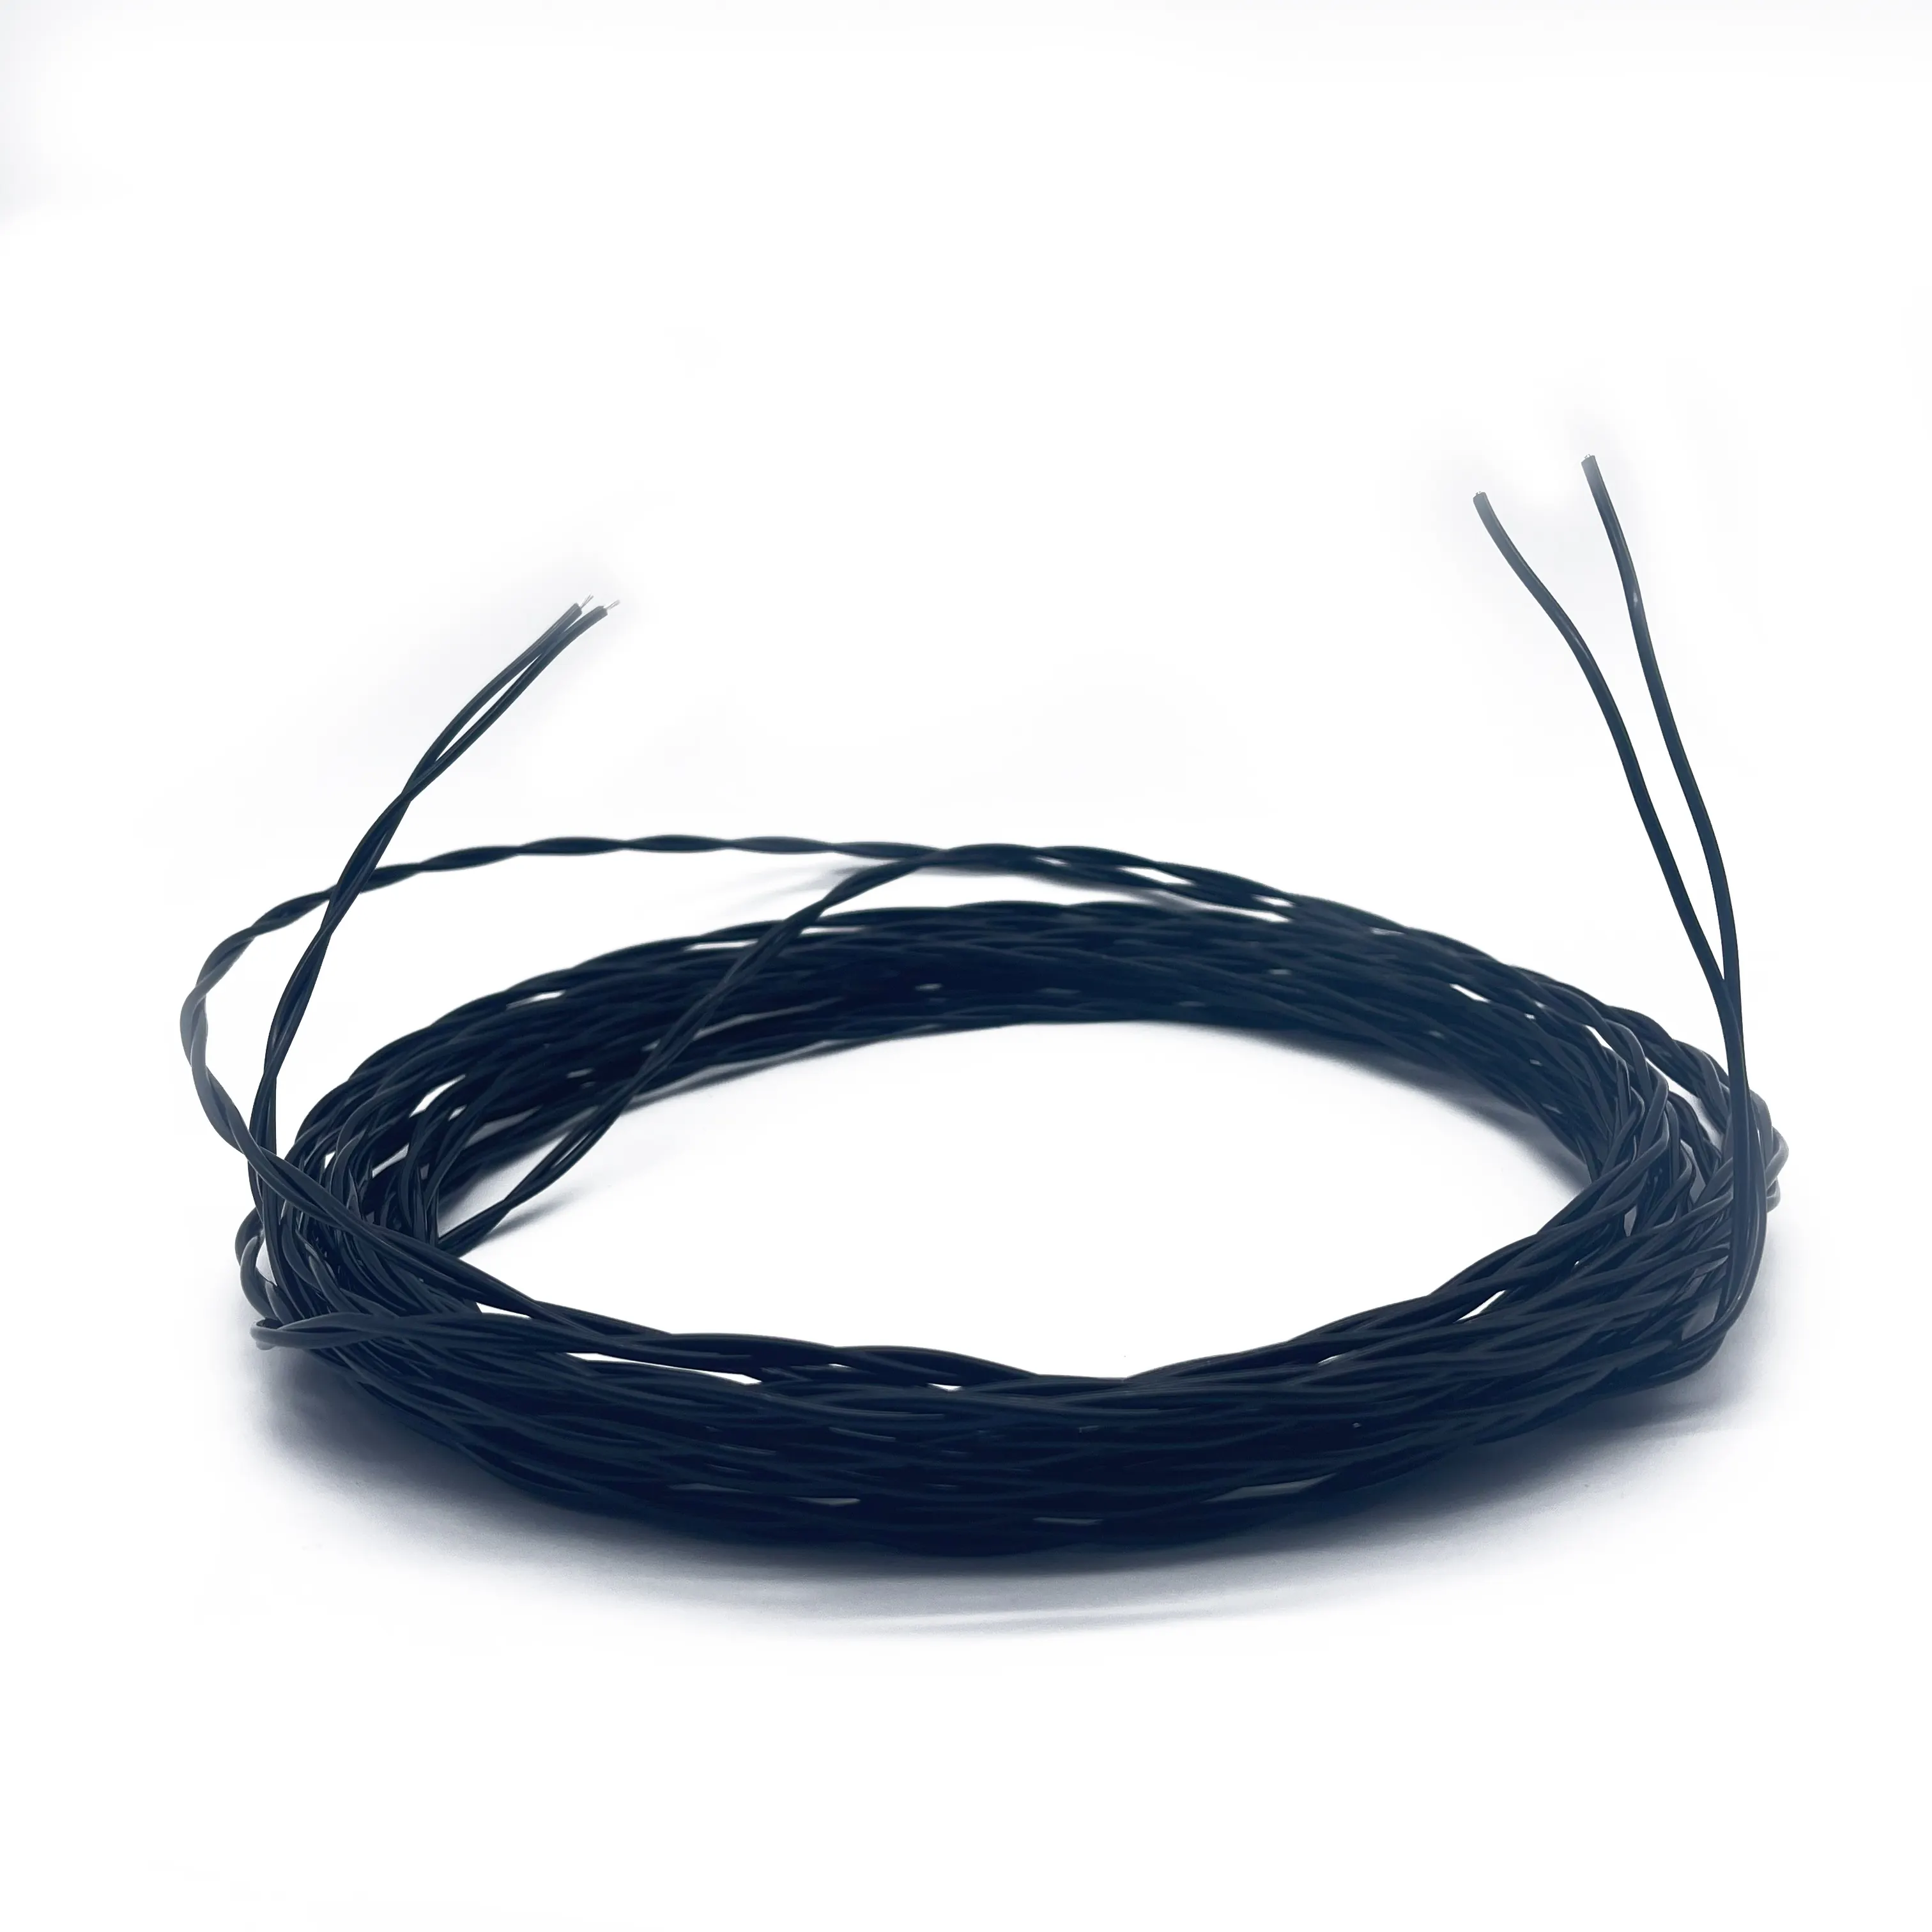 D10 Cable Twisted Pair D10 Field Telephone Cable H.S. Code 8544492100 Suzhou Desan Wire Co., Ltd.